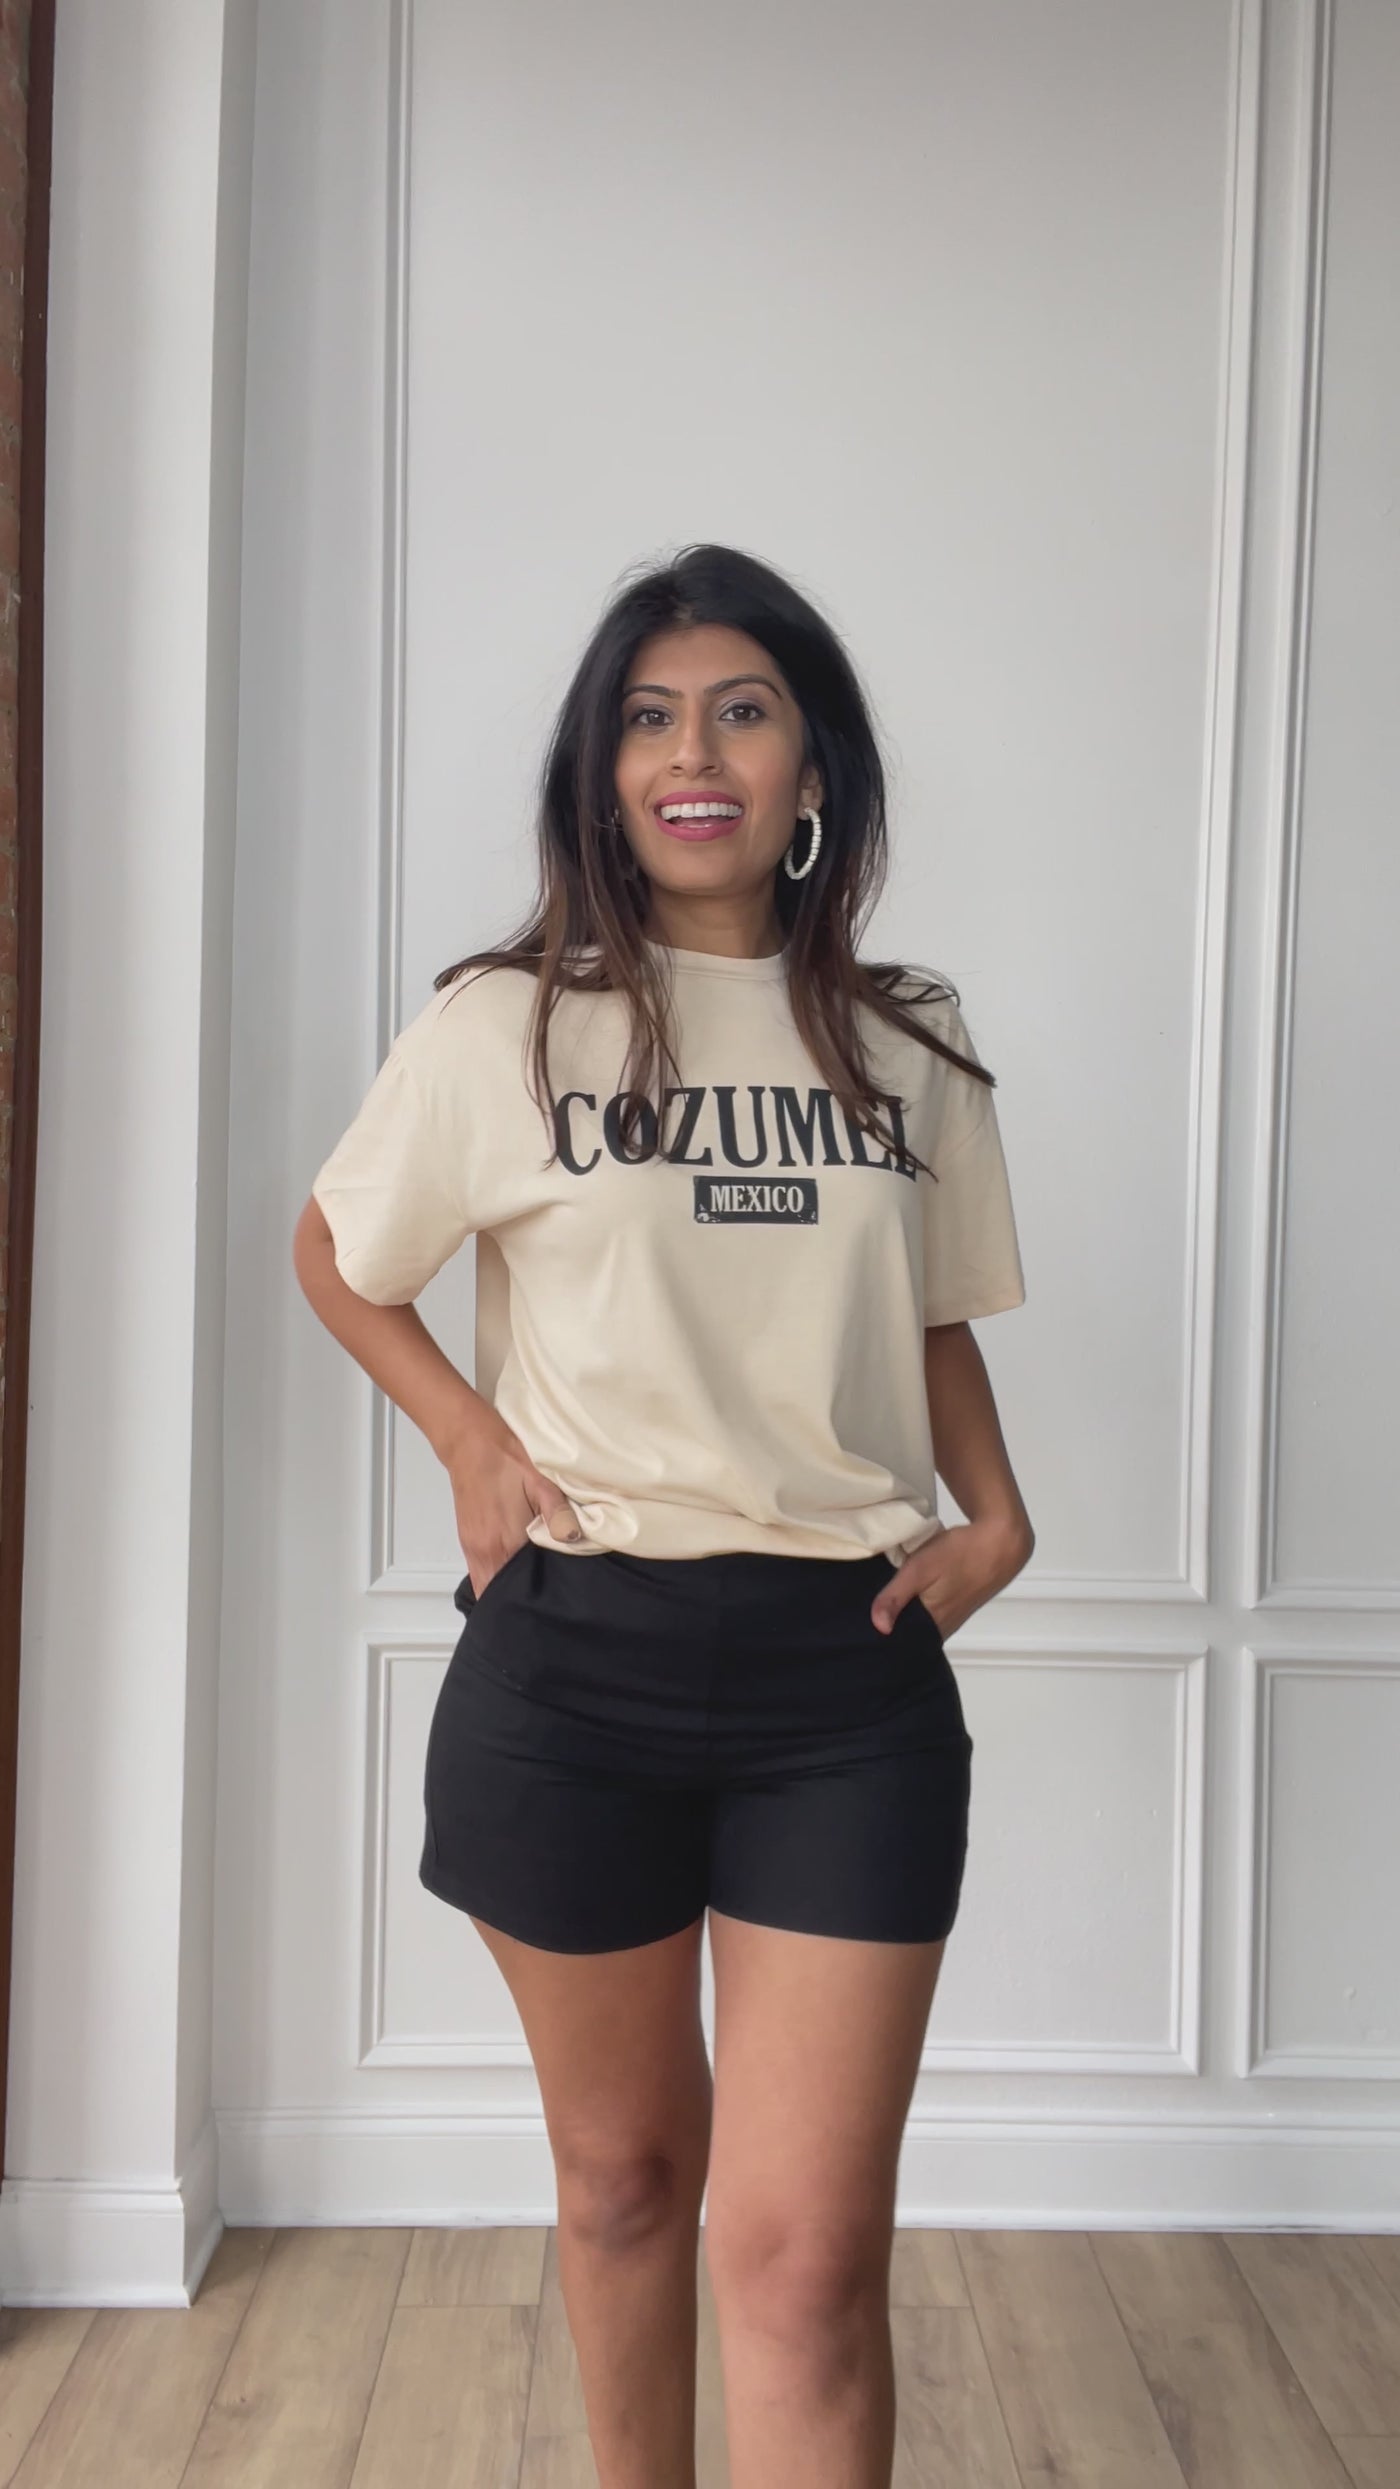 Tropical Vibes: Cozumel Mexico on Oversized Tee, Beige